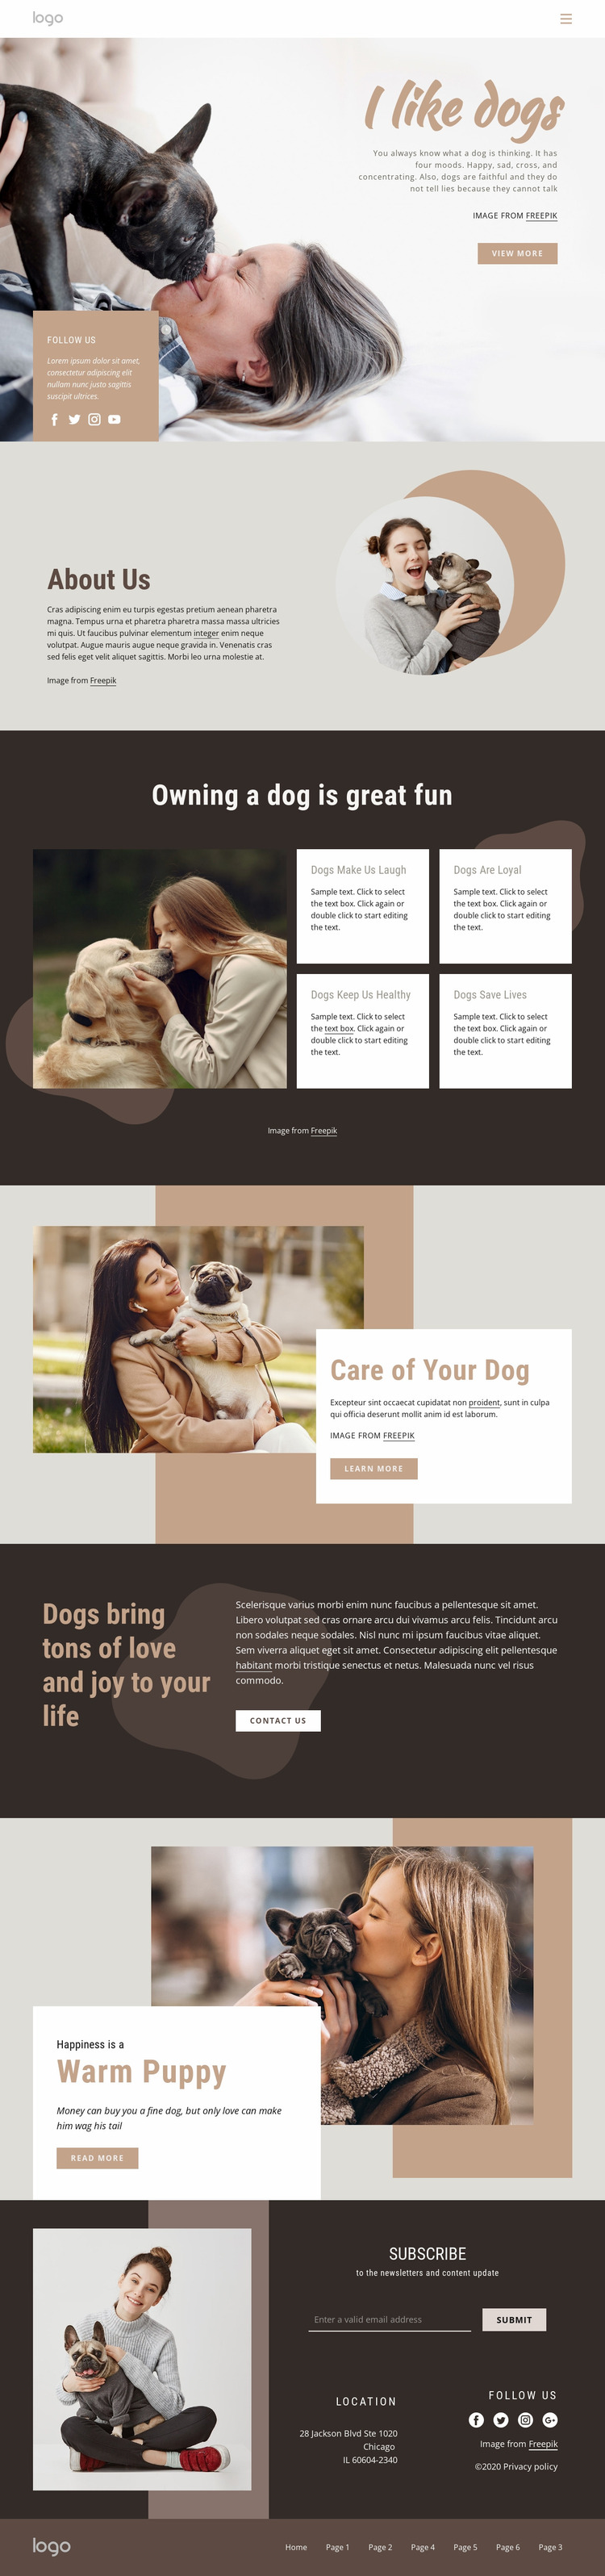 All about dogs Website Mockup